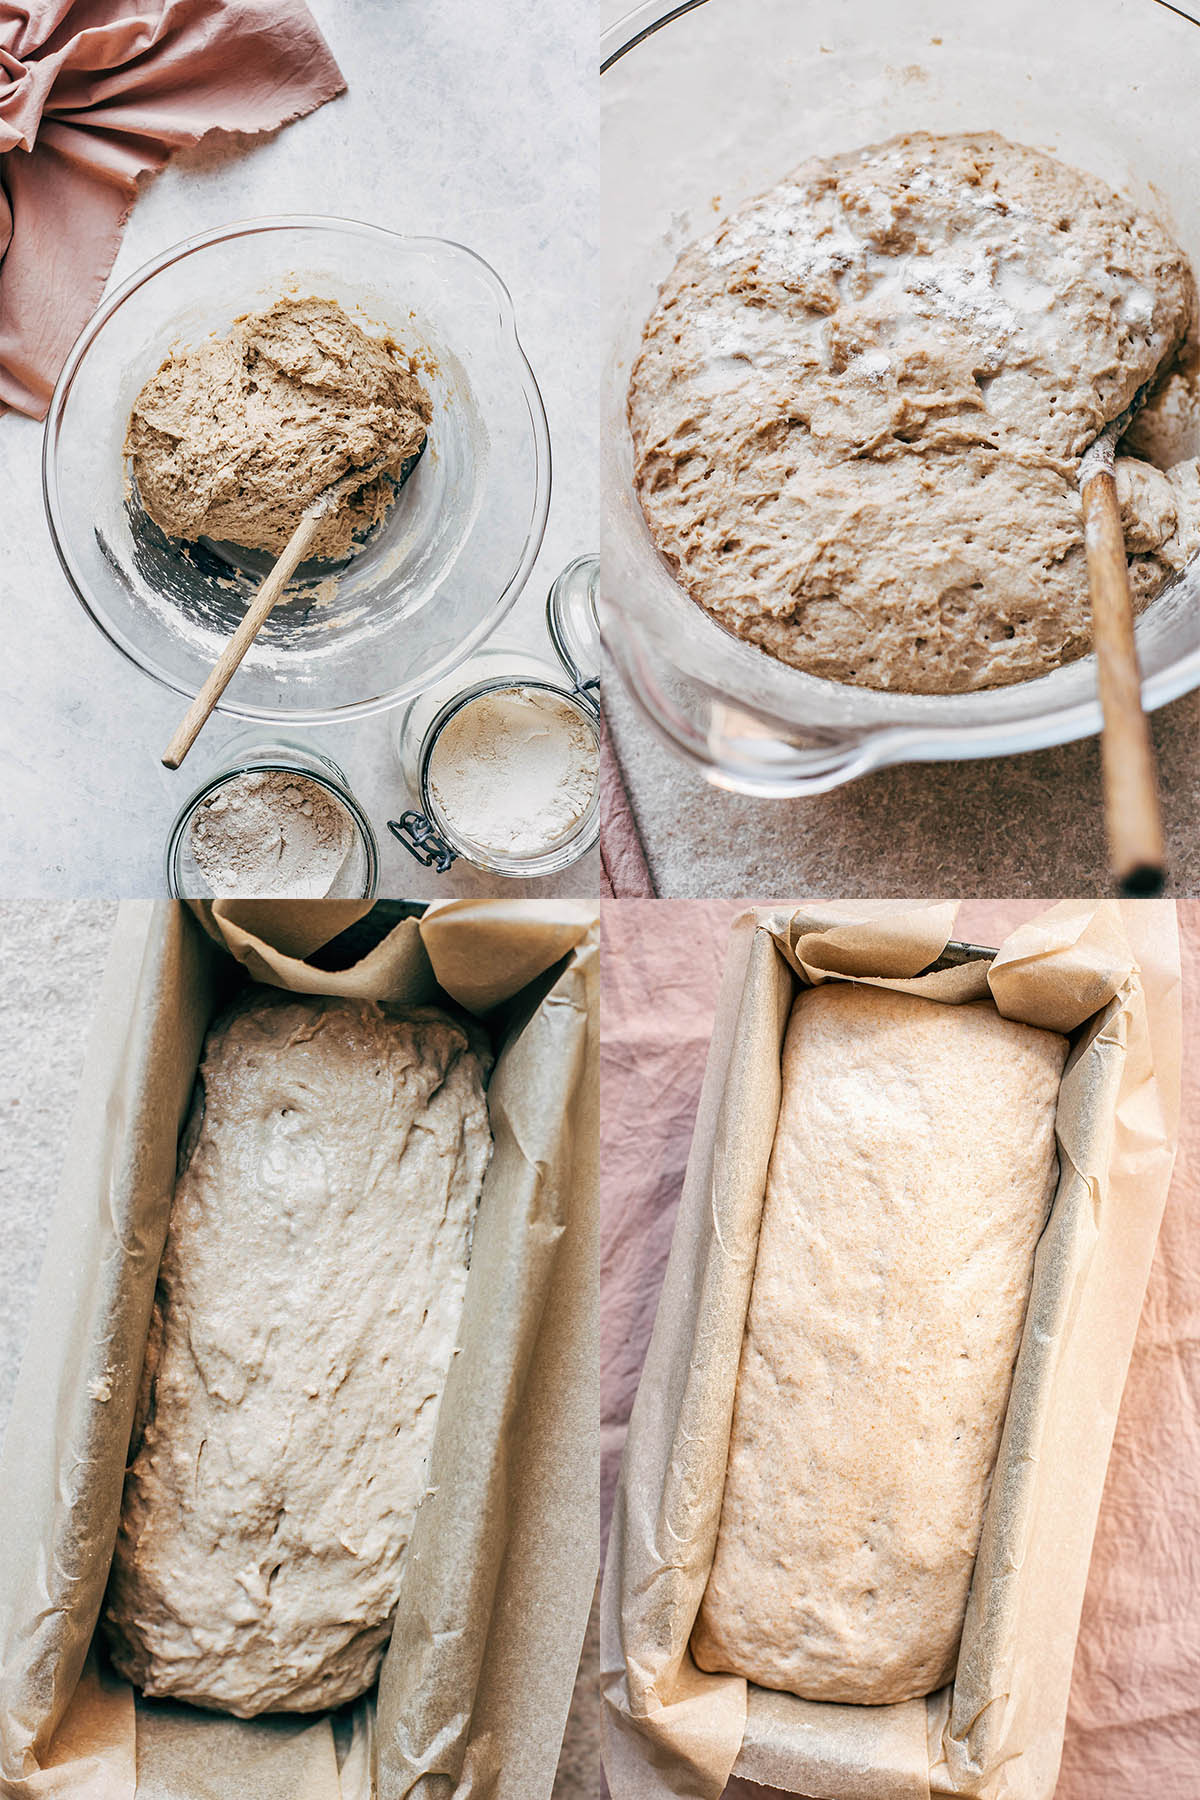 Steps 5-8 of mixing the bread, showing the dough after mixing, after rising, and before and after rising in the tin.